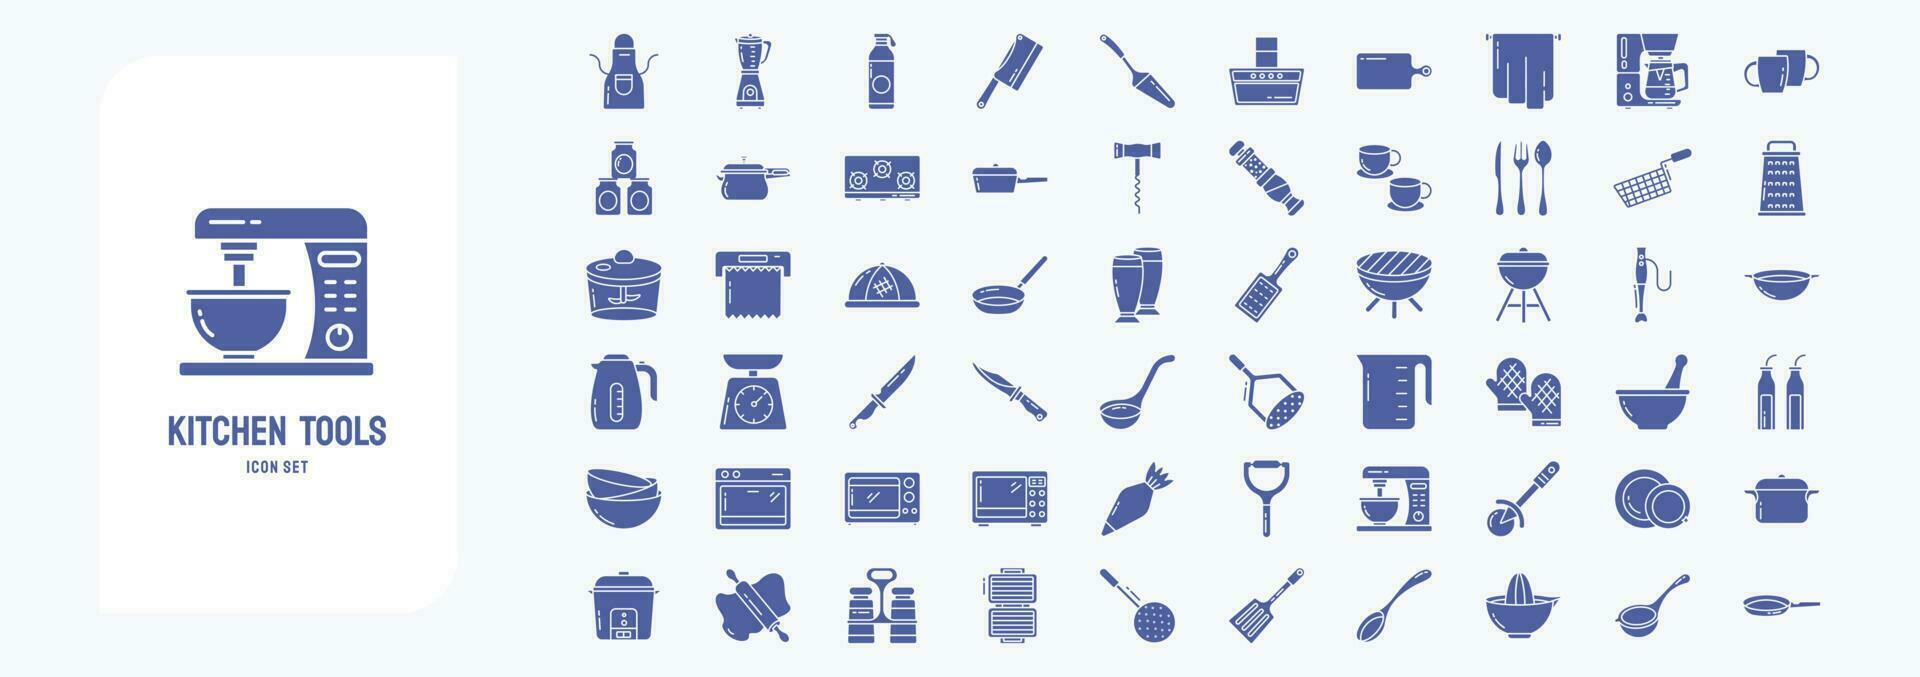 Kitchen Tools, including icons like Apron, Butcher knife, Cooker, Coffee mug and more vector